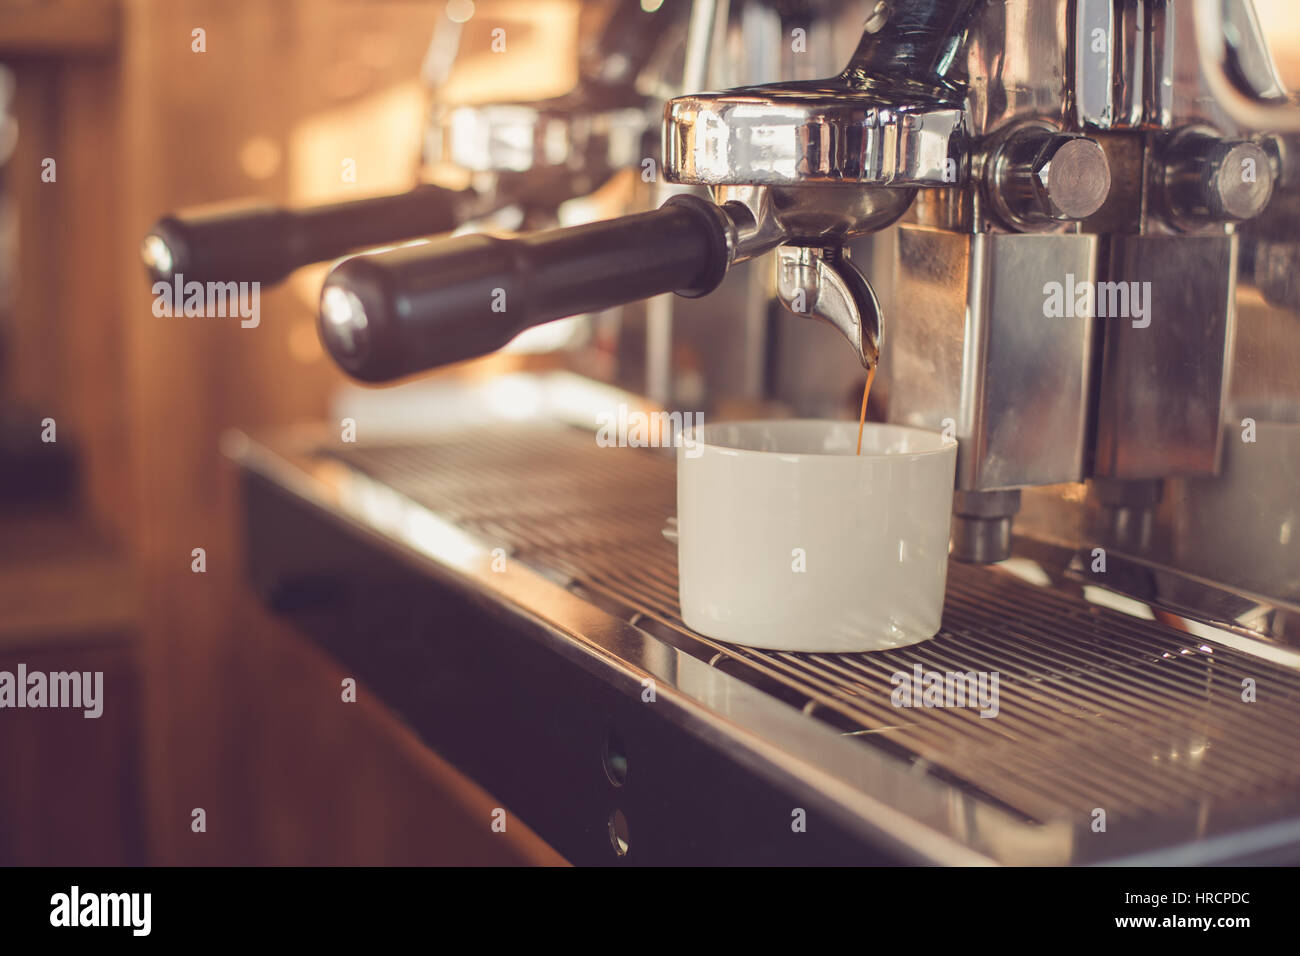 Concept for professional barista in coffee shop Stock Photo